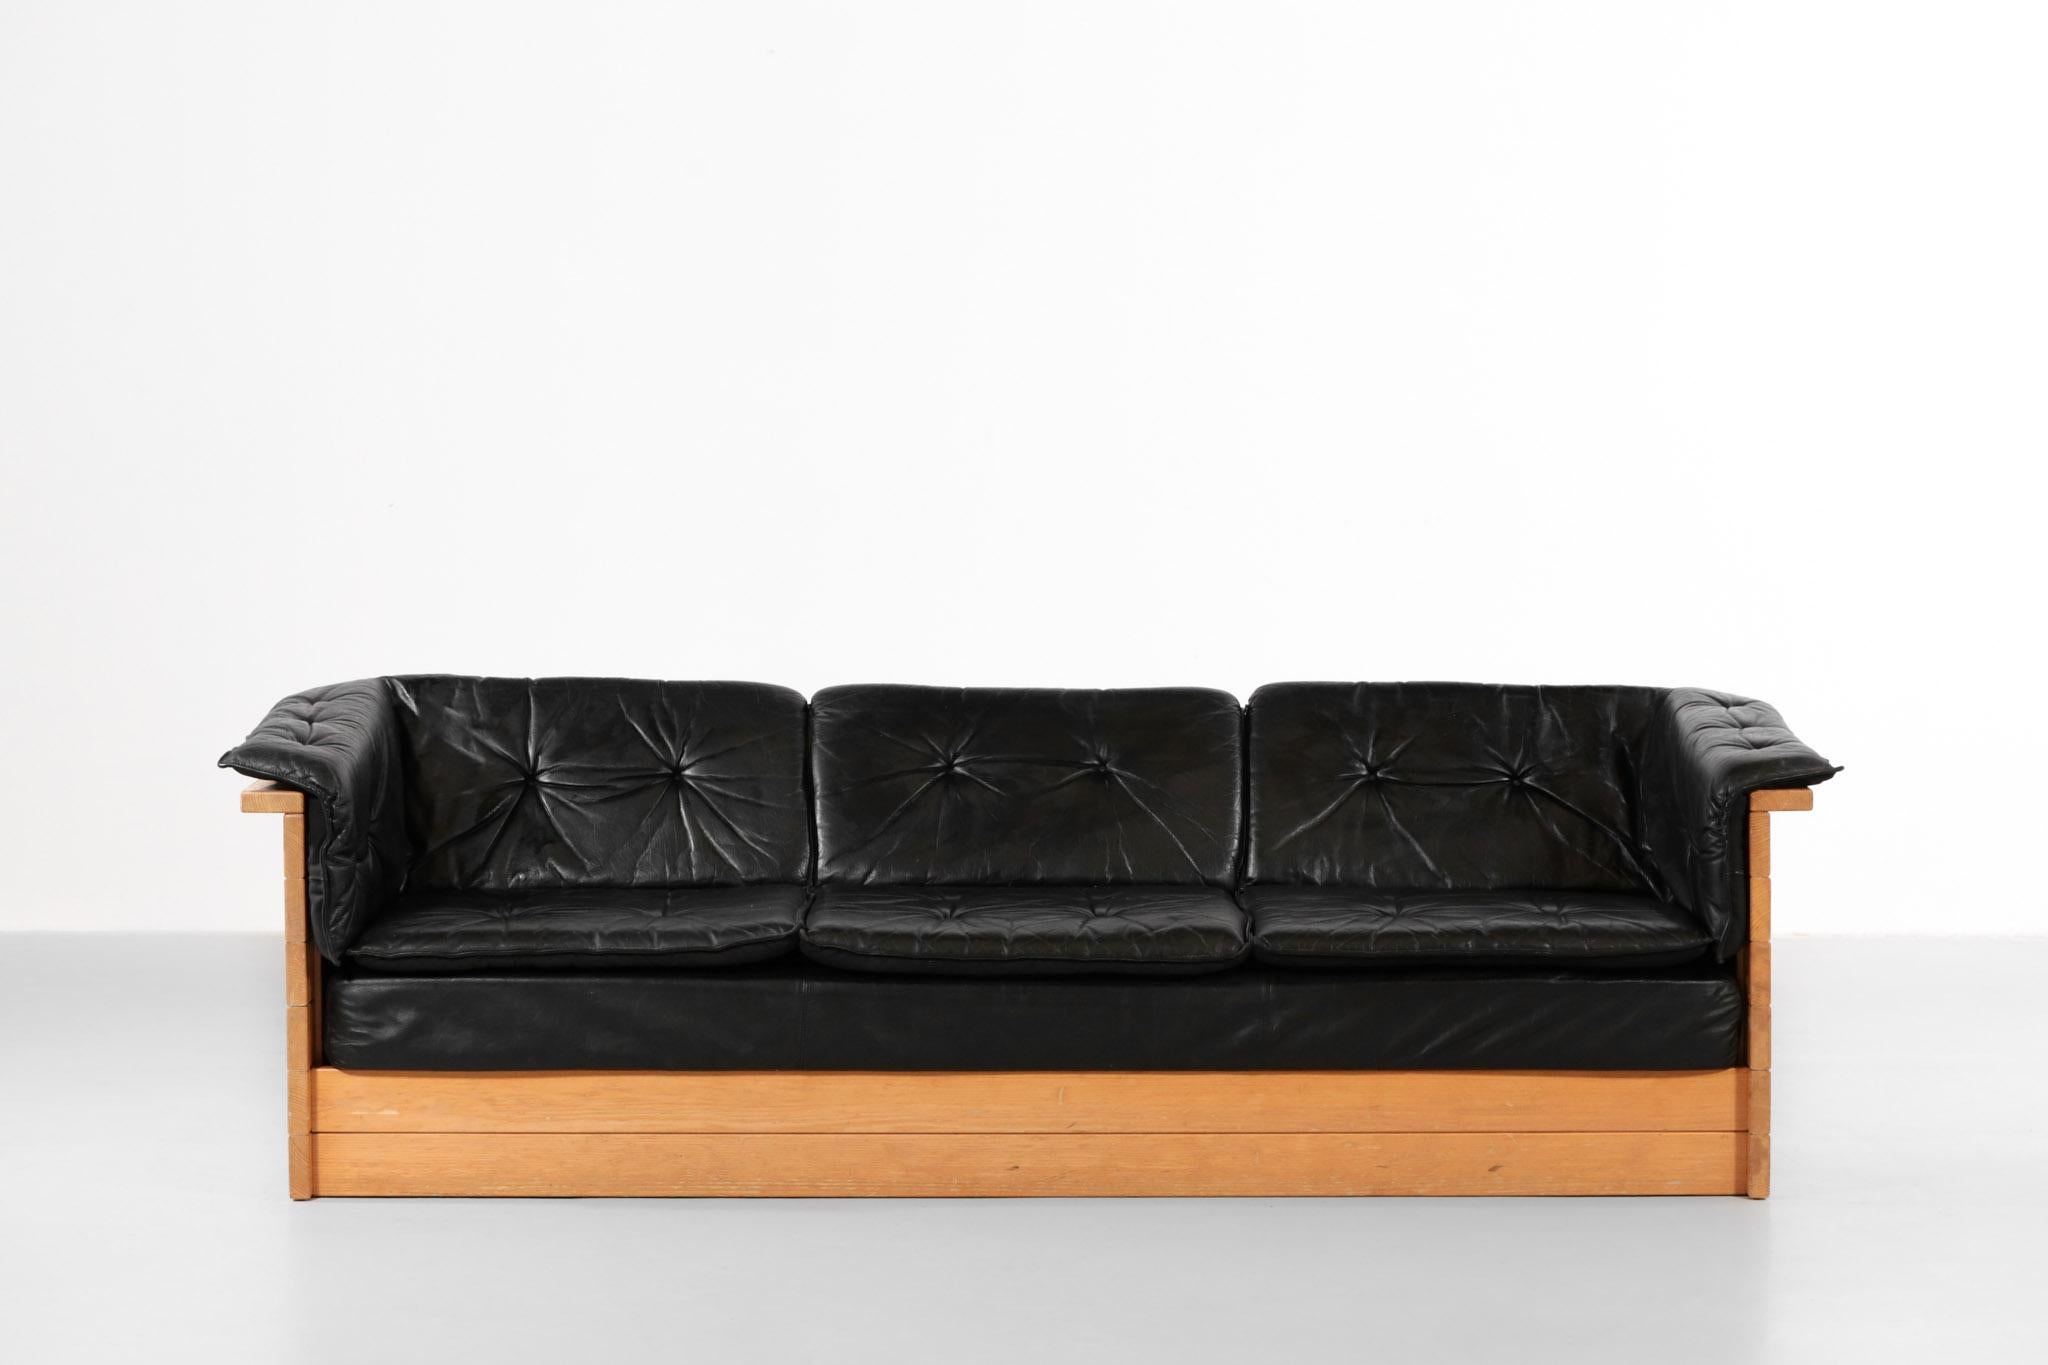 Sofa made of leather and pine, in the style of Charlotte Perriand.